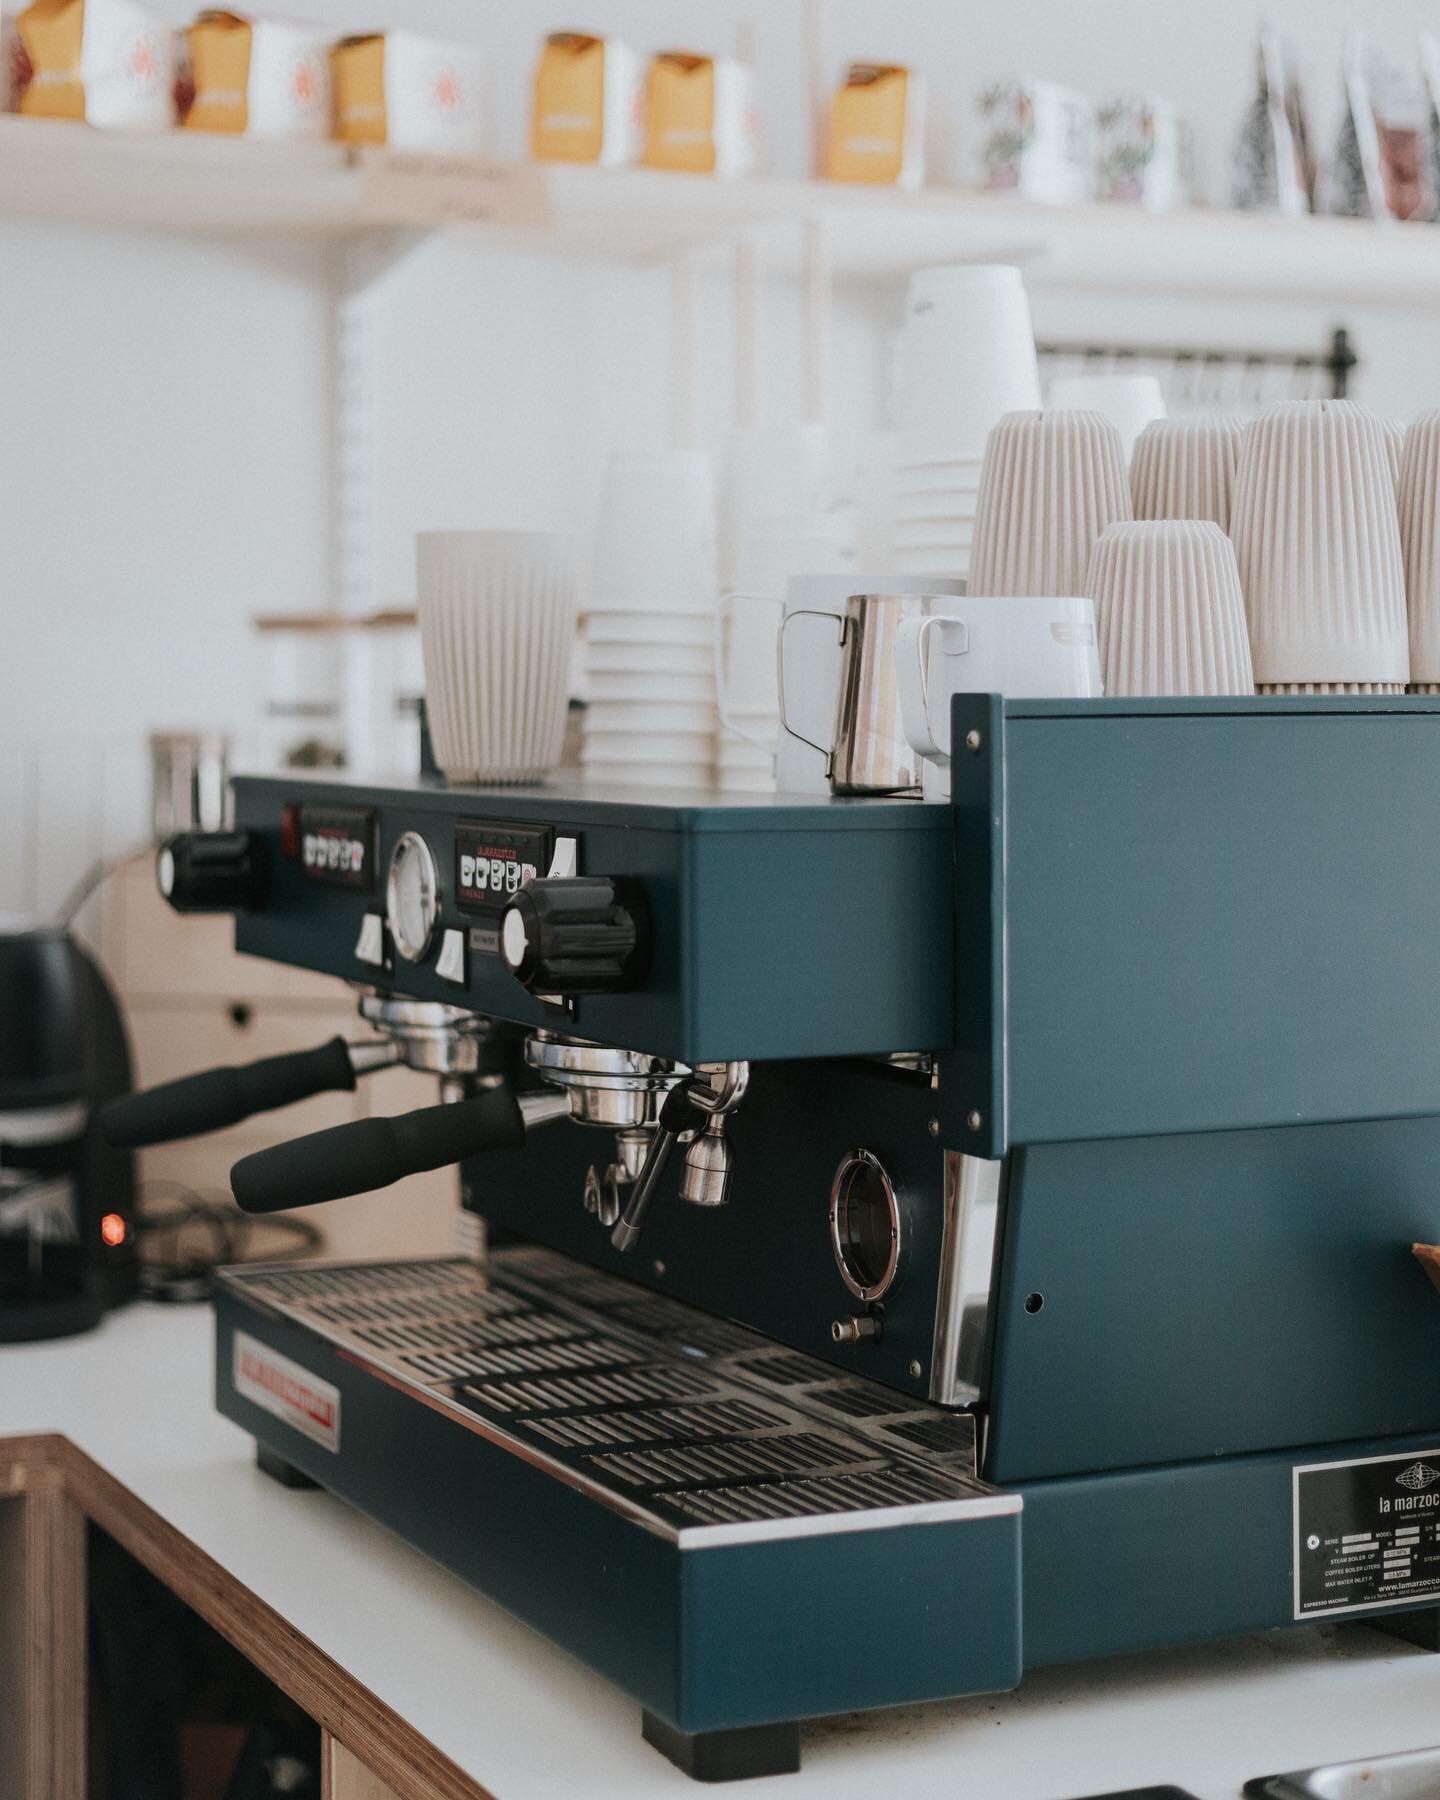 Open 9-4 as usual today. Let&rsquo;s just take a moment to appreciate my beautiful machine, i&rsquo;ll never get tired of this view!

📷 by @sarahbuttonphoto 

#lamarzocco #beautifulcoffeemachine #lamarzoccouk #coffeeandcake #thecotswolds #coffeeshop